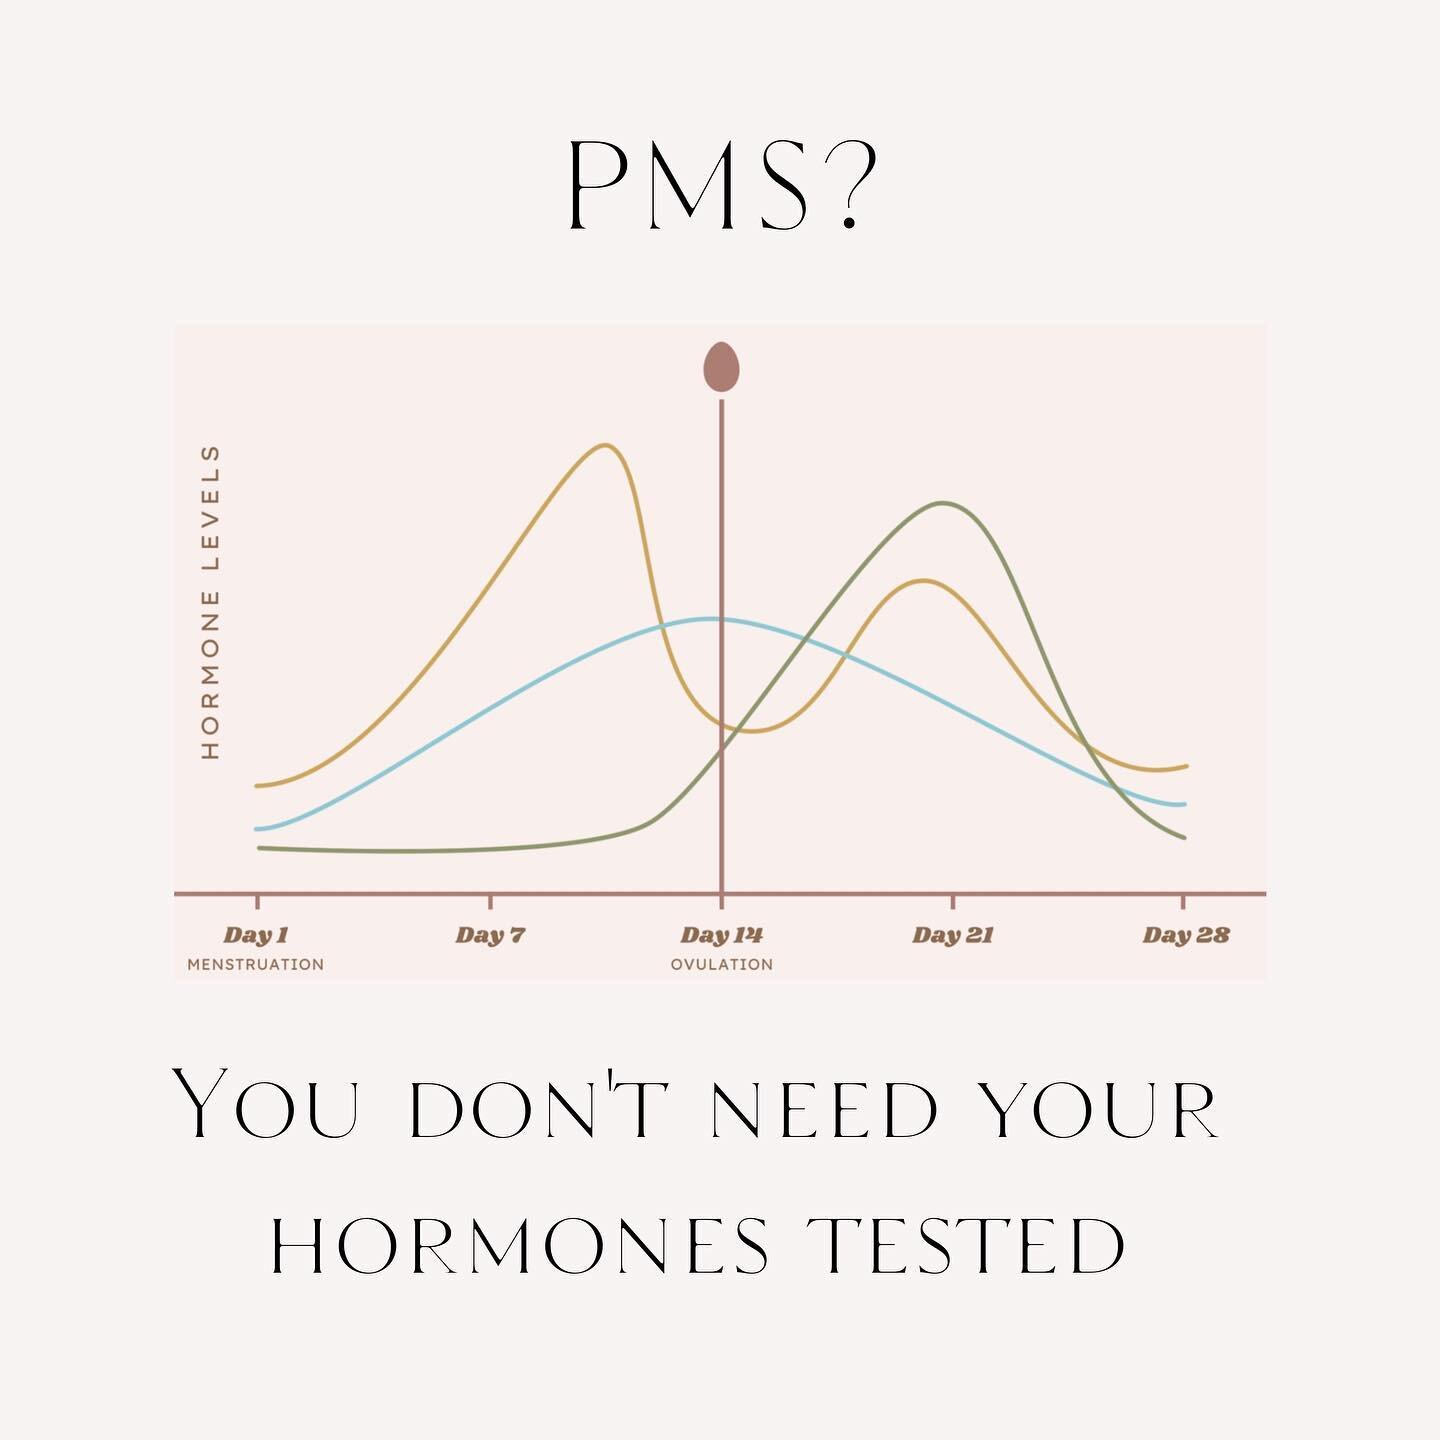 Patients are often surprised when I tell them I don&rsquo;t test hormones to diagnose PMS. 

Hormone levels actually don&rsquo;t give us any information about PMS. That&rsquo;s because abnormal levels of estrogen or progesterone aren&rsquo;t causing 